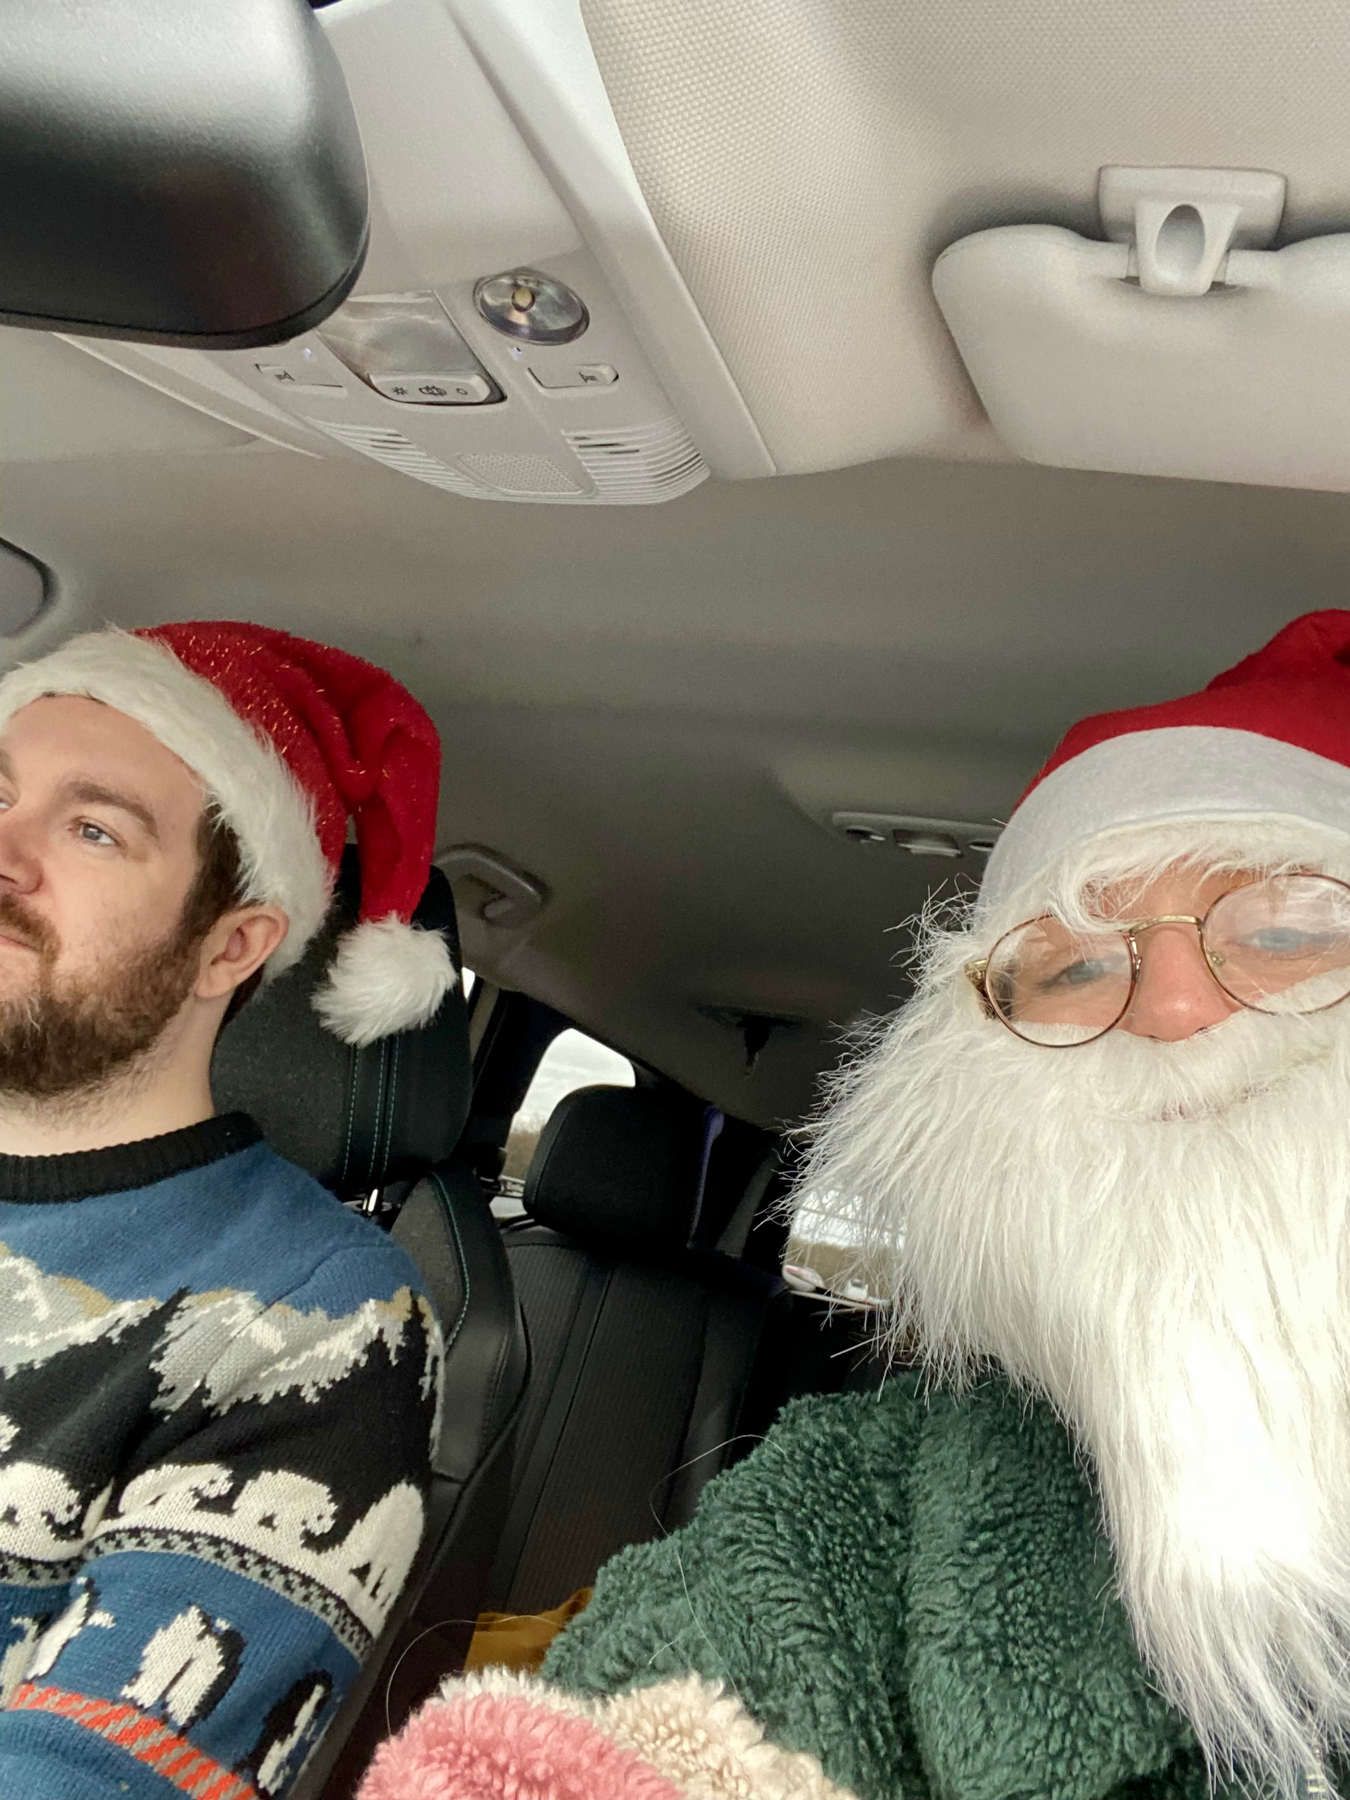 Me and Charlotte in the car dressed in Santa hats